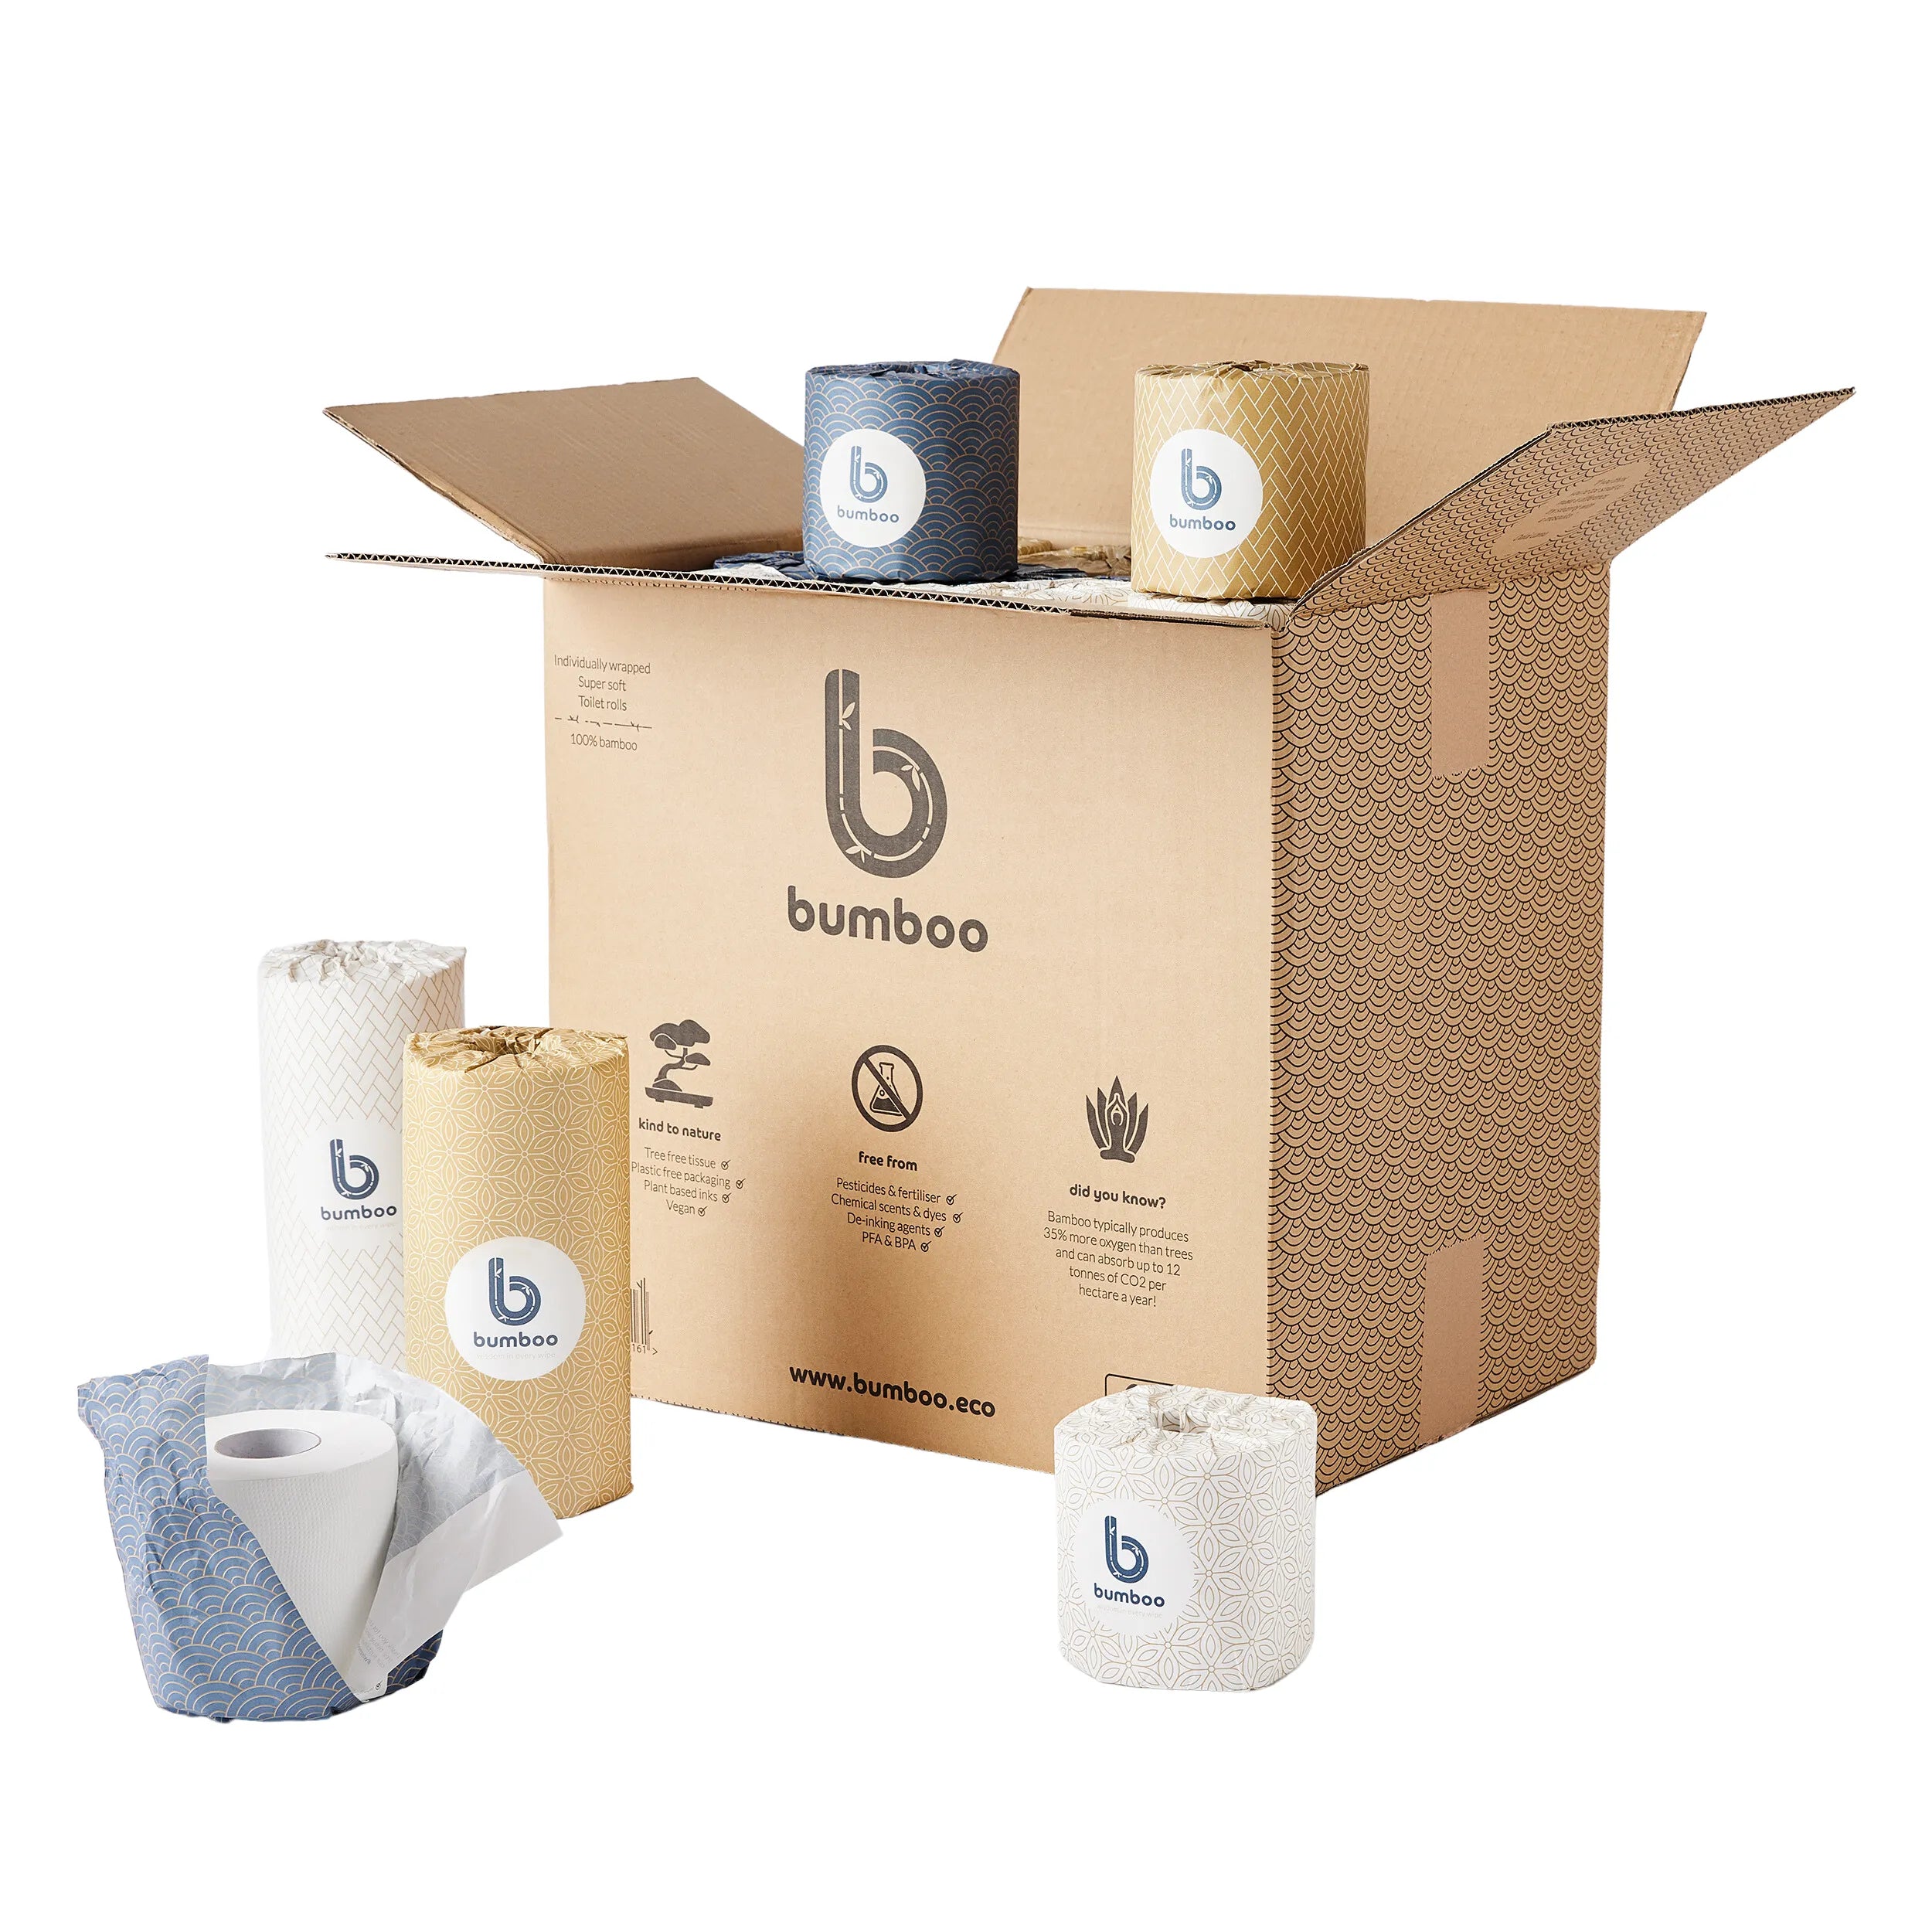 wrapped bamboo mixed box - toilet &amp; kitchen 40 pack